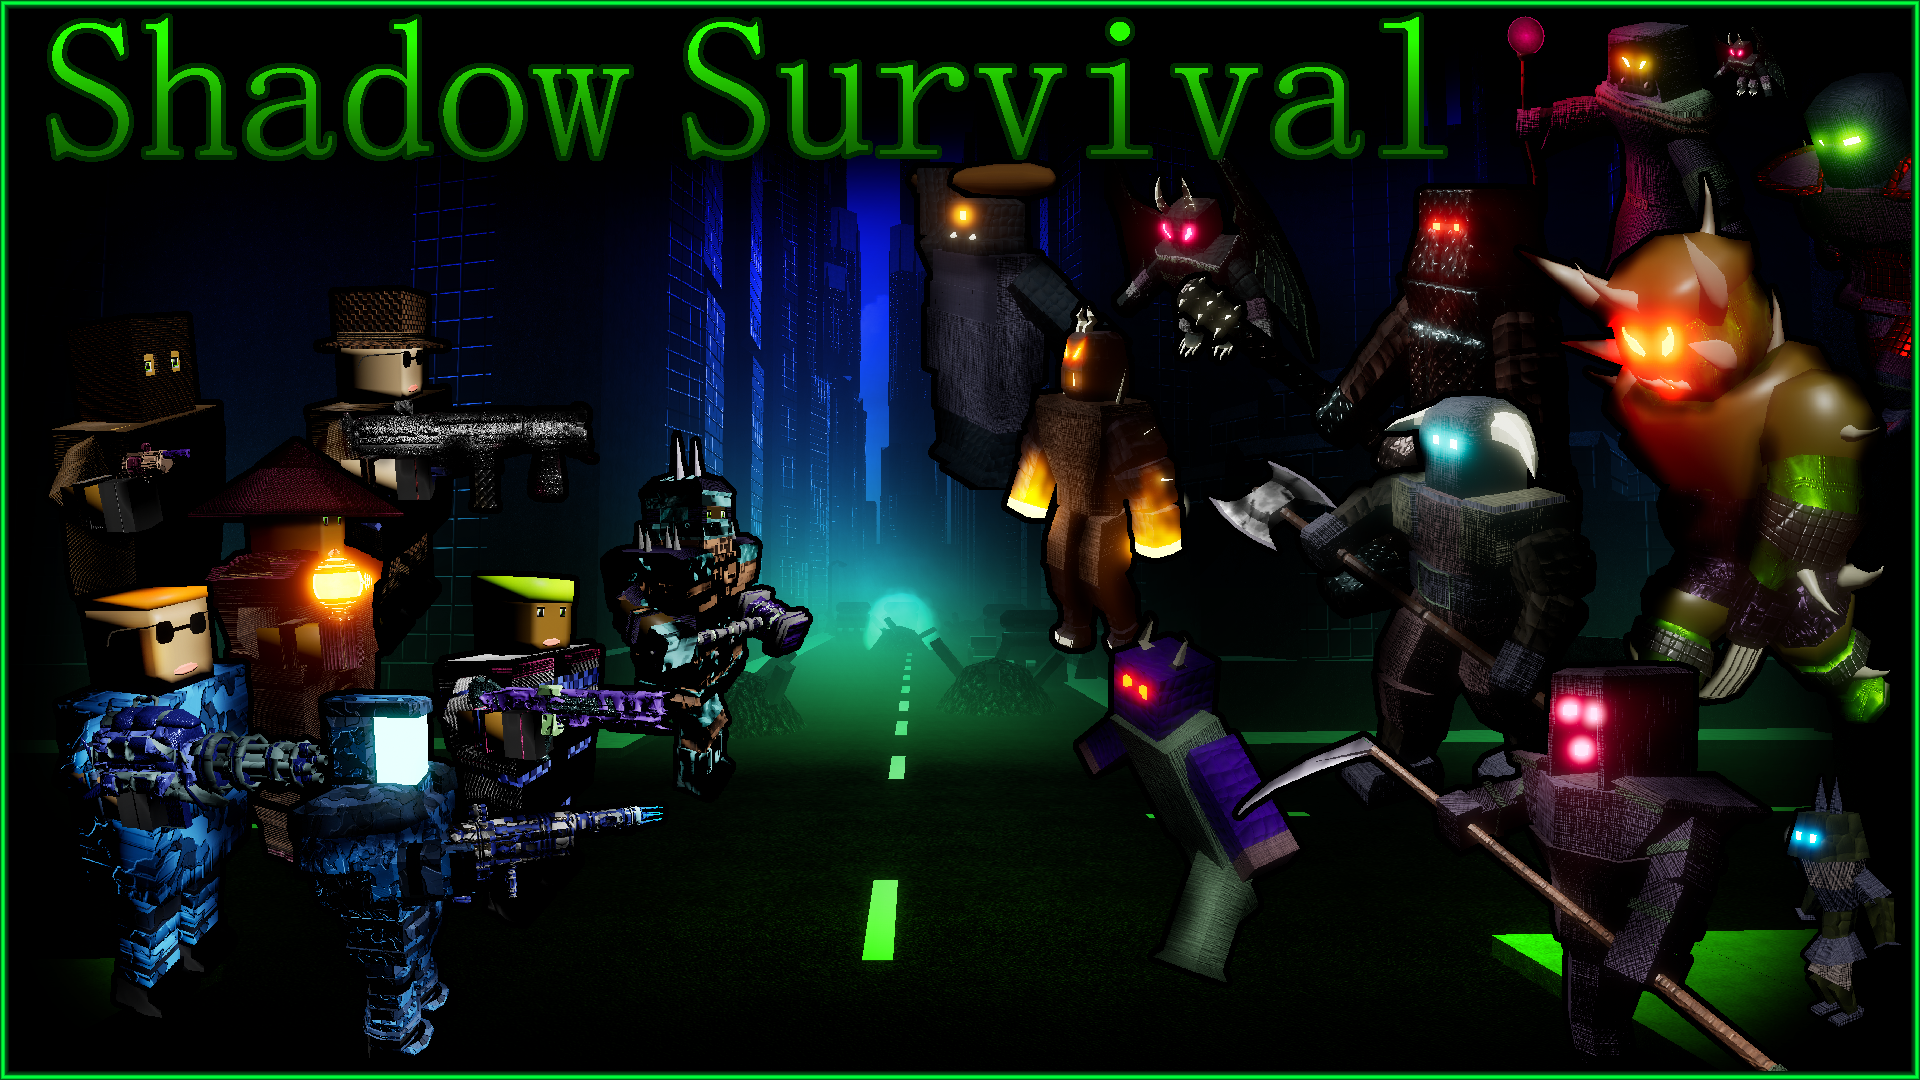 High Tech Weaponry Update news - Shadow Survival - IndieDB